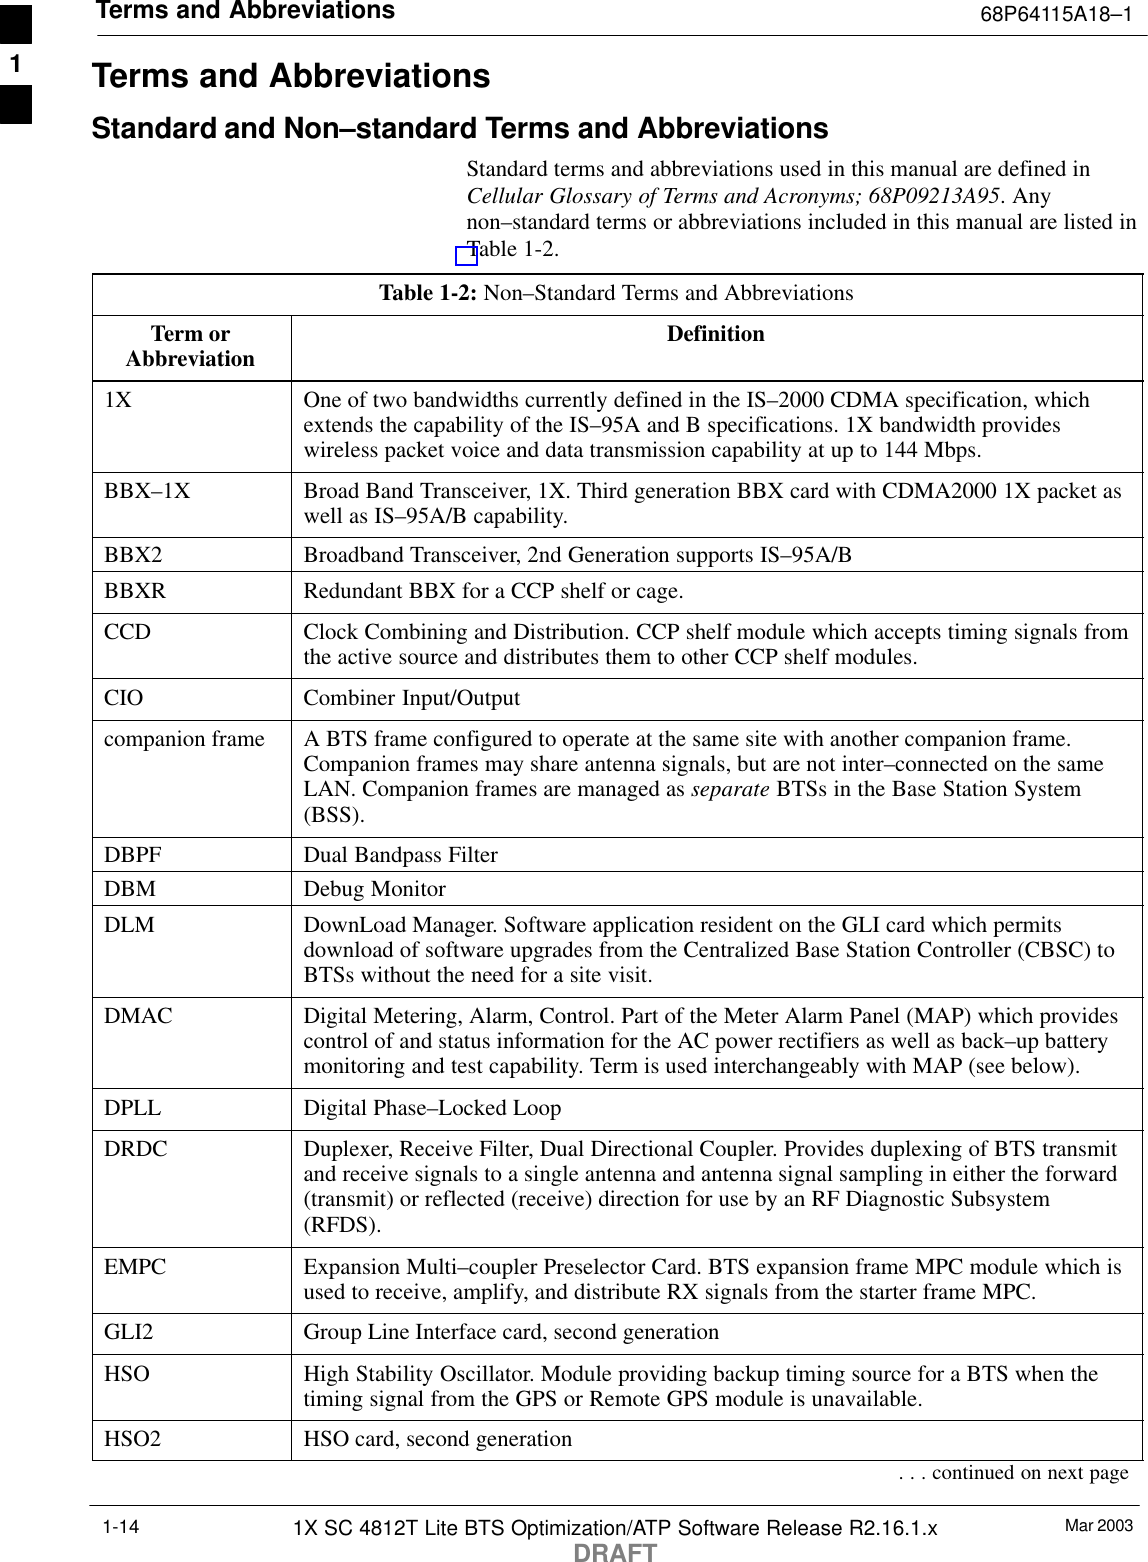 Terms and Abbreviations 68P64115A18–1Mar 20031X SC 4812T Lite BTS Optimization/ATP Software Release R2.16.1.xDRAFT1-14Terms and AbbreviationsStandard and Non–standard Terms and AbbreviationsStandard terms and abbreviations used in this manual are defined inCellular Glossary of Terms and Acronyms; 68P09213A95. Anynon–standard terms or abbreviations included in this manual are listed inTable 1-2.Table 1-2: Non–Standard Terms and AbbreviationsTerm orAbbreviation Definition1X One of two bandwidths currently defined in the IS–2000 CDMA specification, whichextends the capability of the IS–95A and B specifications. 1X bandwidth provideswireless packet voice and data transmission capability at up to 144 Mbps.BBX–1X Broad Band Transceiver, 1X. Third generation BBX card with CDMA2000 1X packet aswell as IS–95A/B capability.BBX2 Broadband Transceiver, 2nd Generation supports IS–95A/BBBXR Redundant BBX for a CCP shelf or cage.CCD Clock Combining and Distribution. CCP shelf module which accepts timing signals fromthe active source and distributes them to other CCP shelf modules.CIO Combiner Input/Outputcompanion frame A BTS frame configured to operate at the same site with another companion frame.Companion frames may share antenna signals, but are not inter–connected on the sameLAN. Companion frames are managed as separate BTSs in the Base Station System(BSS).DBPF Dual Bandpass FilterDBM Debug MonitorDLM DownLoad Manager. Software application resident on the GLI card which permitsdownload of software upgrades from the Centralized Base Station Controller (CBSC) toBTSs without the need for a site visit.DMAC Digital Metering, Alarm, Control. Part of the Meter Alarm Panel (MAP) which providescontrol of and status information for the AC power rectifiers as well as back–up batterymonitoring and test capability. Term is used interchangeably with MAP (see below).DPLL Digital Phase–Locked LoopDRDC Duplexer, Receive Filter, Dual Directional Coupler. Provides duplexing of BTS transmitand receive signals to a single antenna and antenna signal sampling in either the forward(transmit) or reflected (receive) direction for use by an RF Diagnostic Subsystem(RFDS).EMPC Expansion Multi–coupler Preselector Card. BTS expansion frame MPC module which isused to receive, amplify, and distribute RX signals from the starter frame MPC.GLI2 Group Line Interface card, second generationHSO High Stability Oscillator. Module providing backup timing source for a BTS when thetiming signal from the GPS or Remote GPS module is unavailable.HSO2 HSO card, second generation. . . continued on next page1